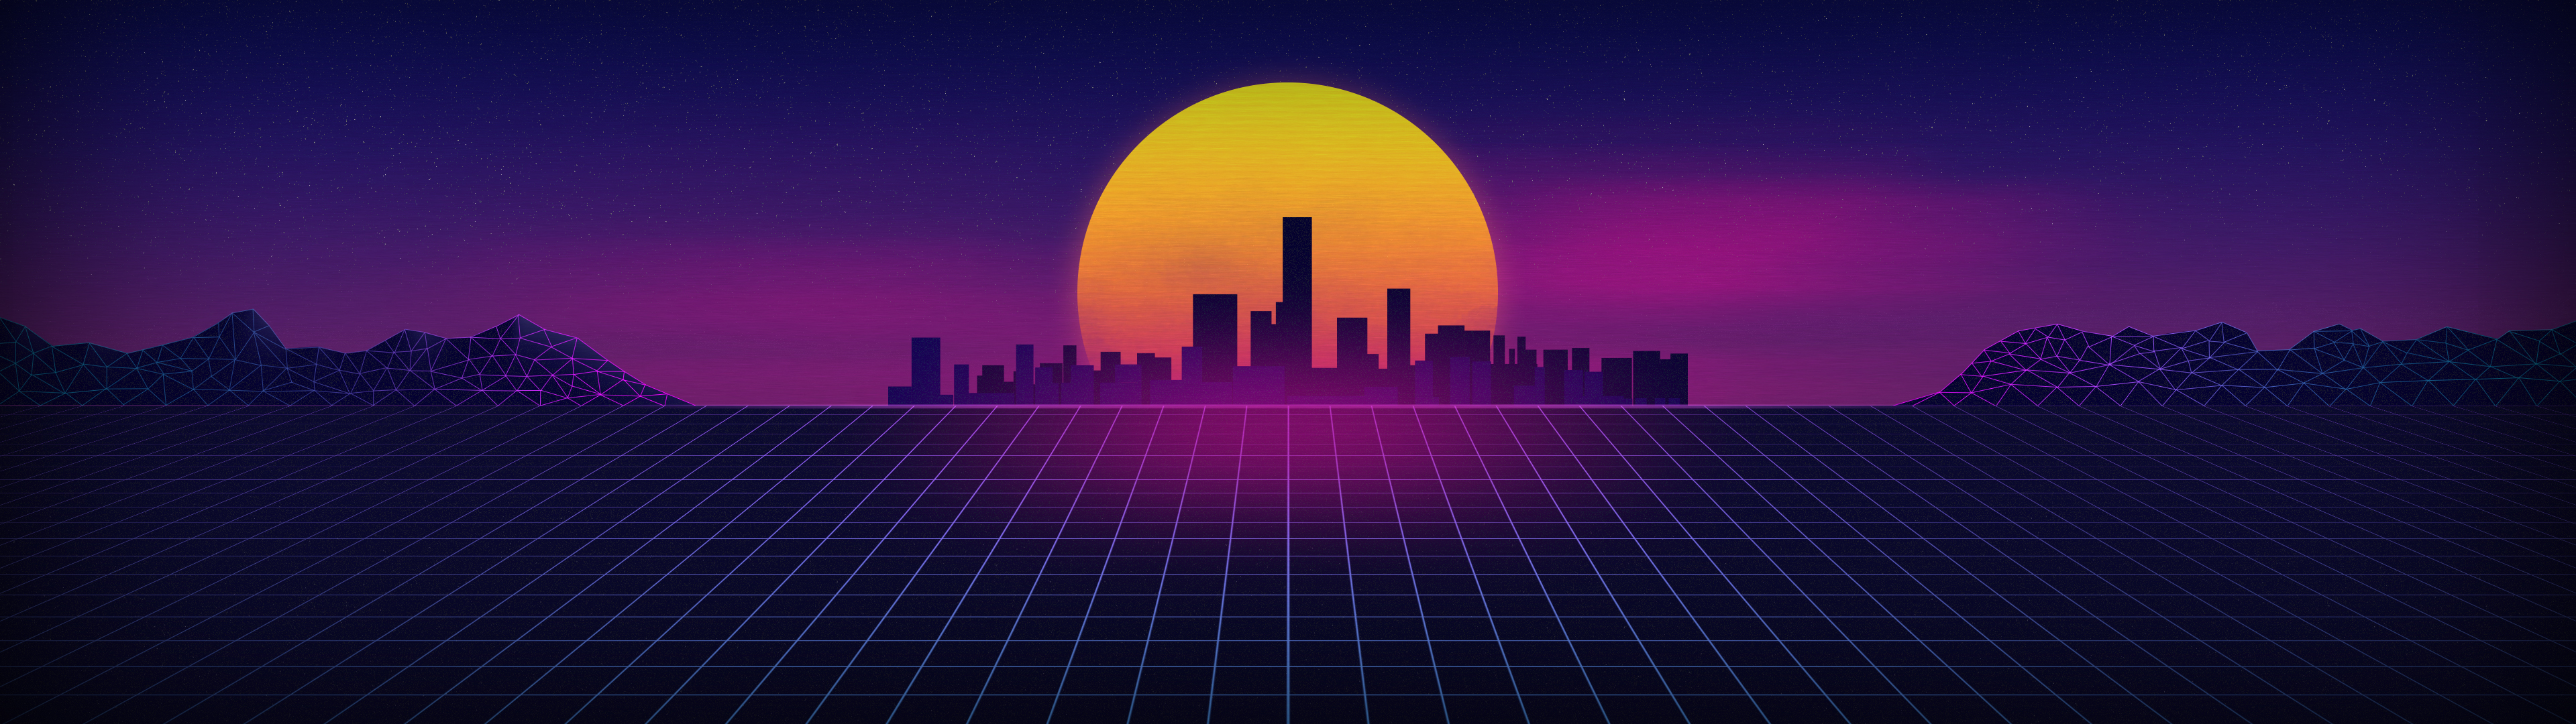 Synthwave Dual Screen Wallpaper By Prostyle43